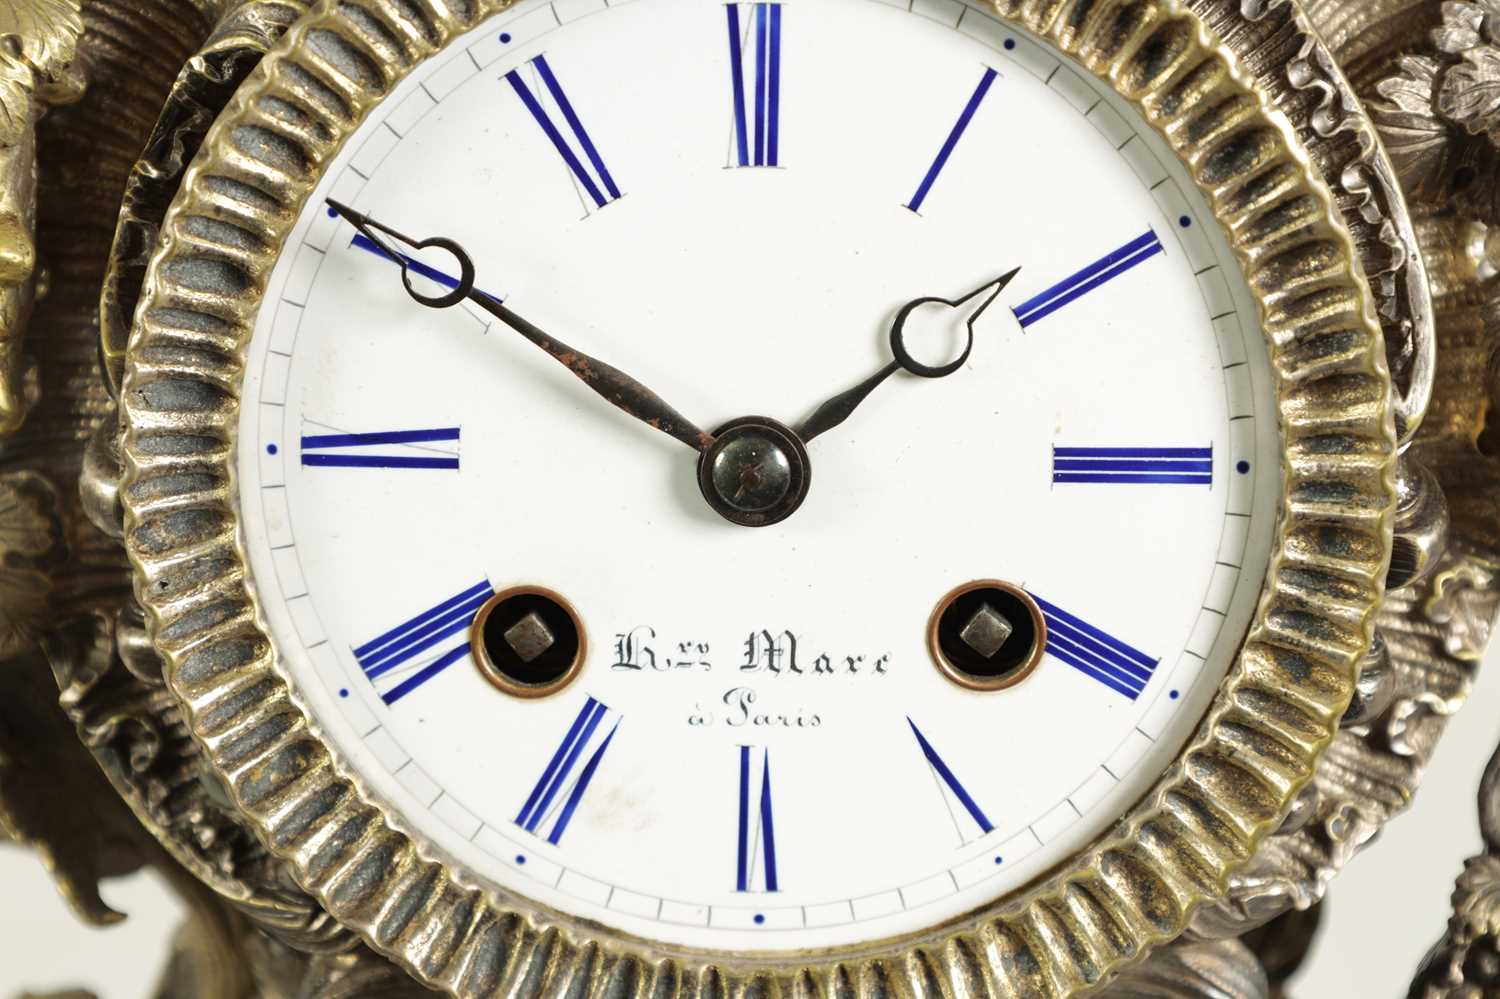 HENRY MARC, A PARIS. A MID 19TH CENTURY FRENCH ROCOCO STYLE SILVERED BRONZE MANTEL CLOCK - Image 2 of 10